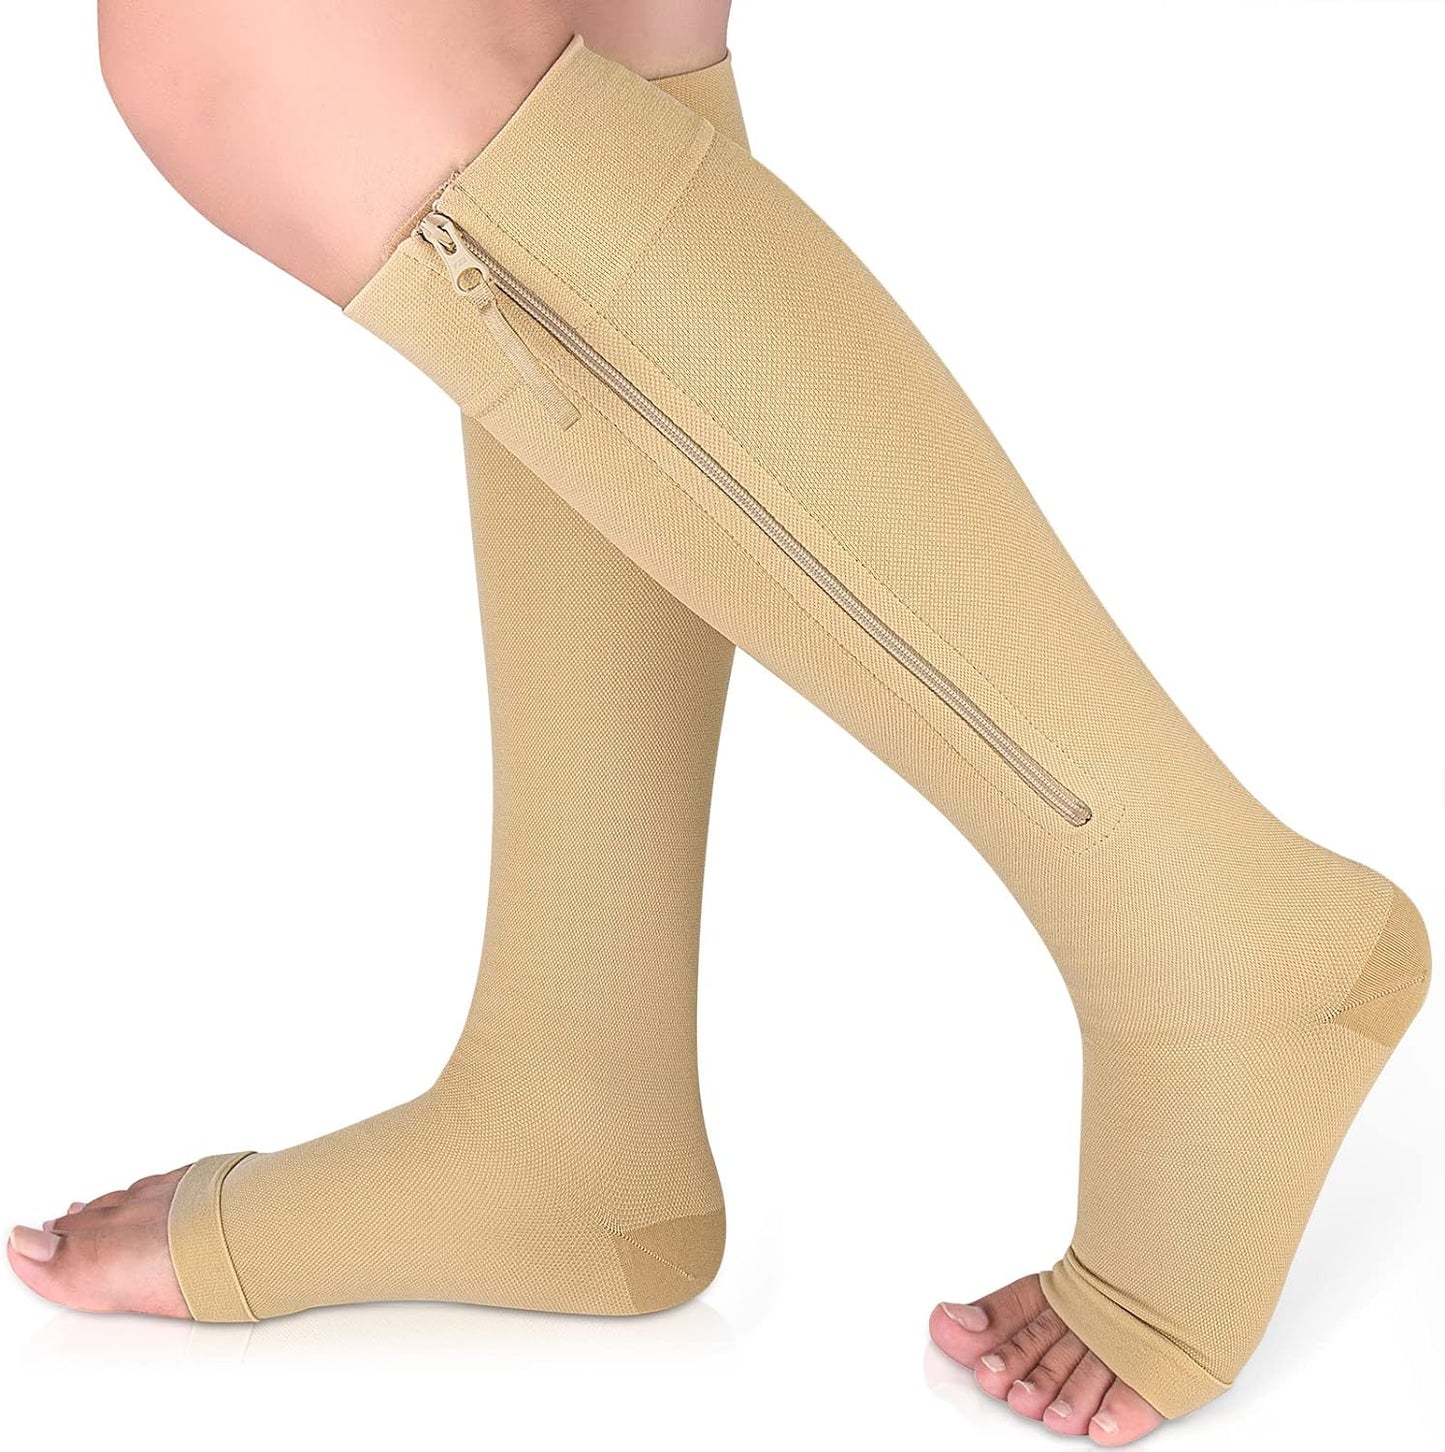 Pain Relief Compression Socks